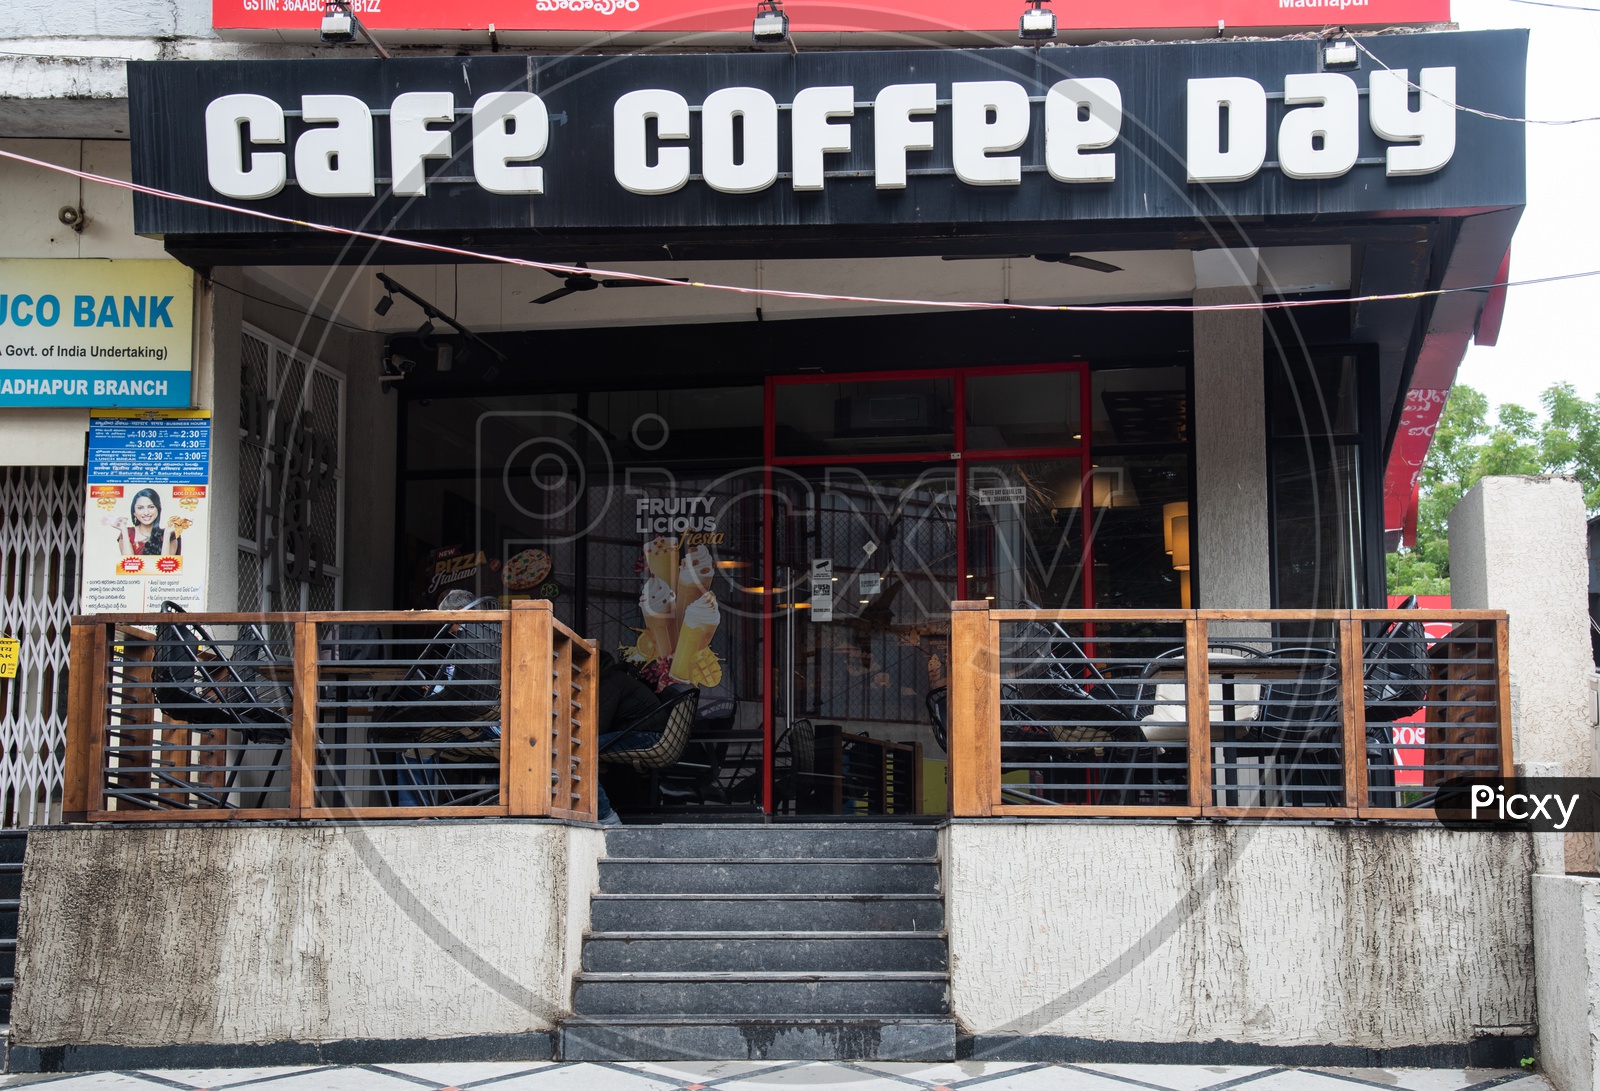 Cafe Coffee Day  CCD  Outlet or Cafe  an Indian Chain Of Cafe